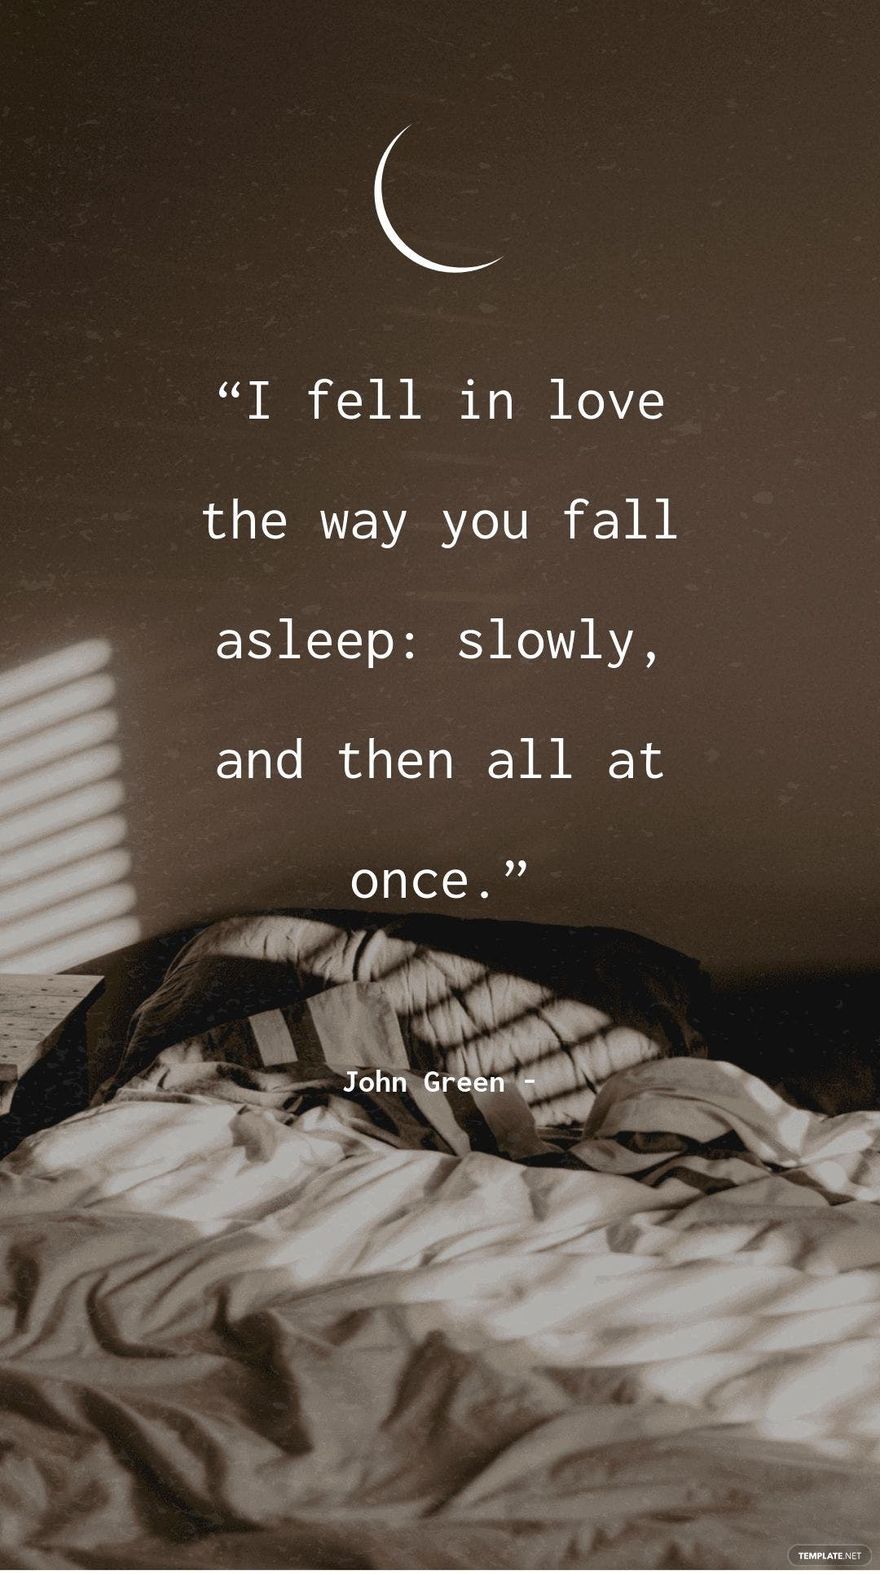 John Green - “I fell in love the way you fall asleep: slowly, and then all at once.”